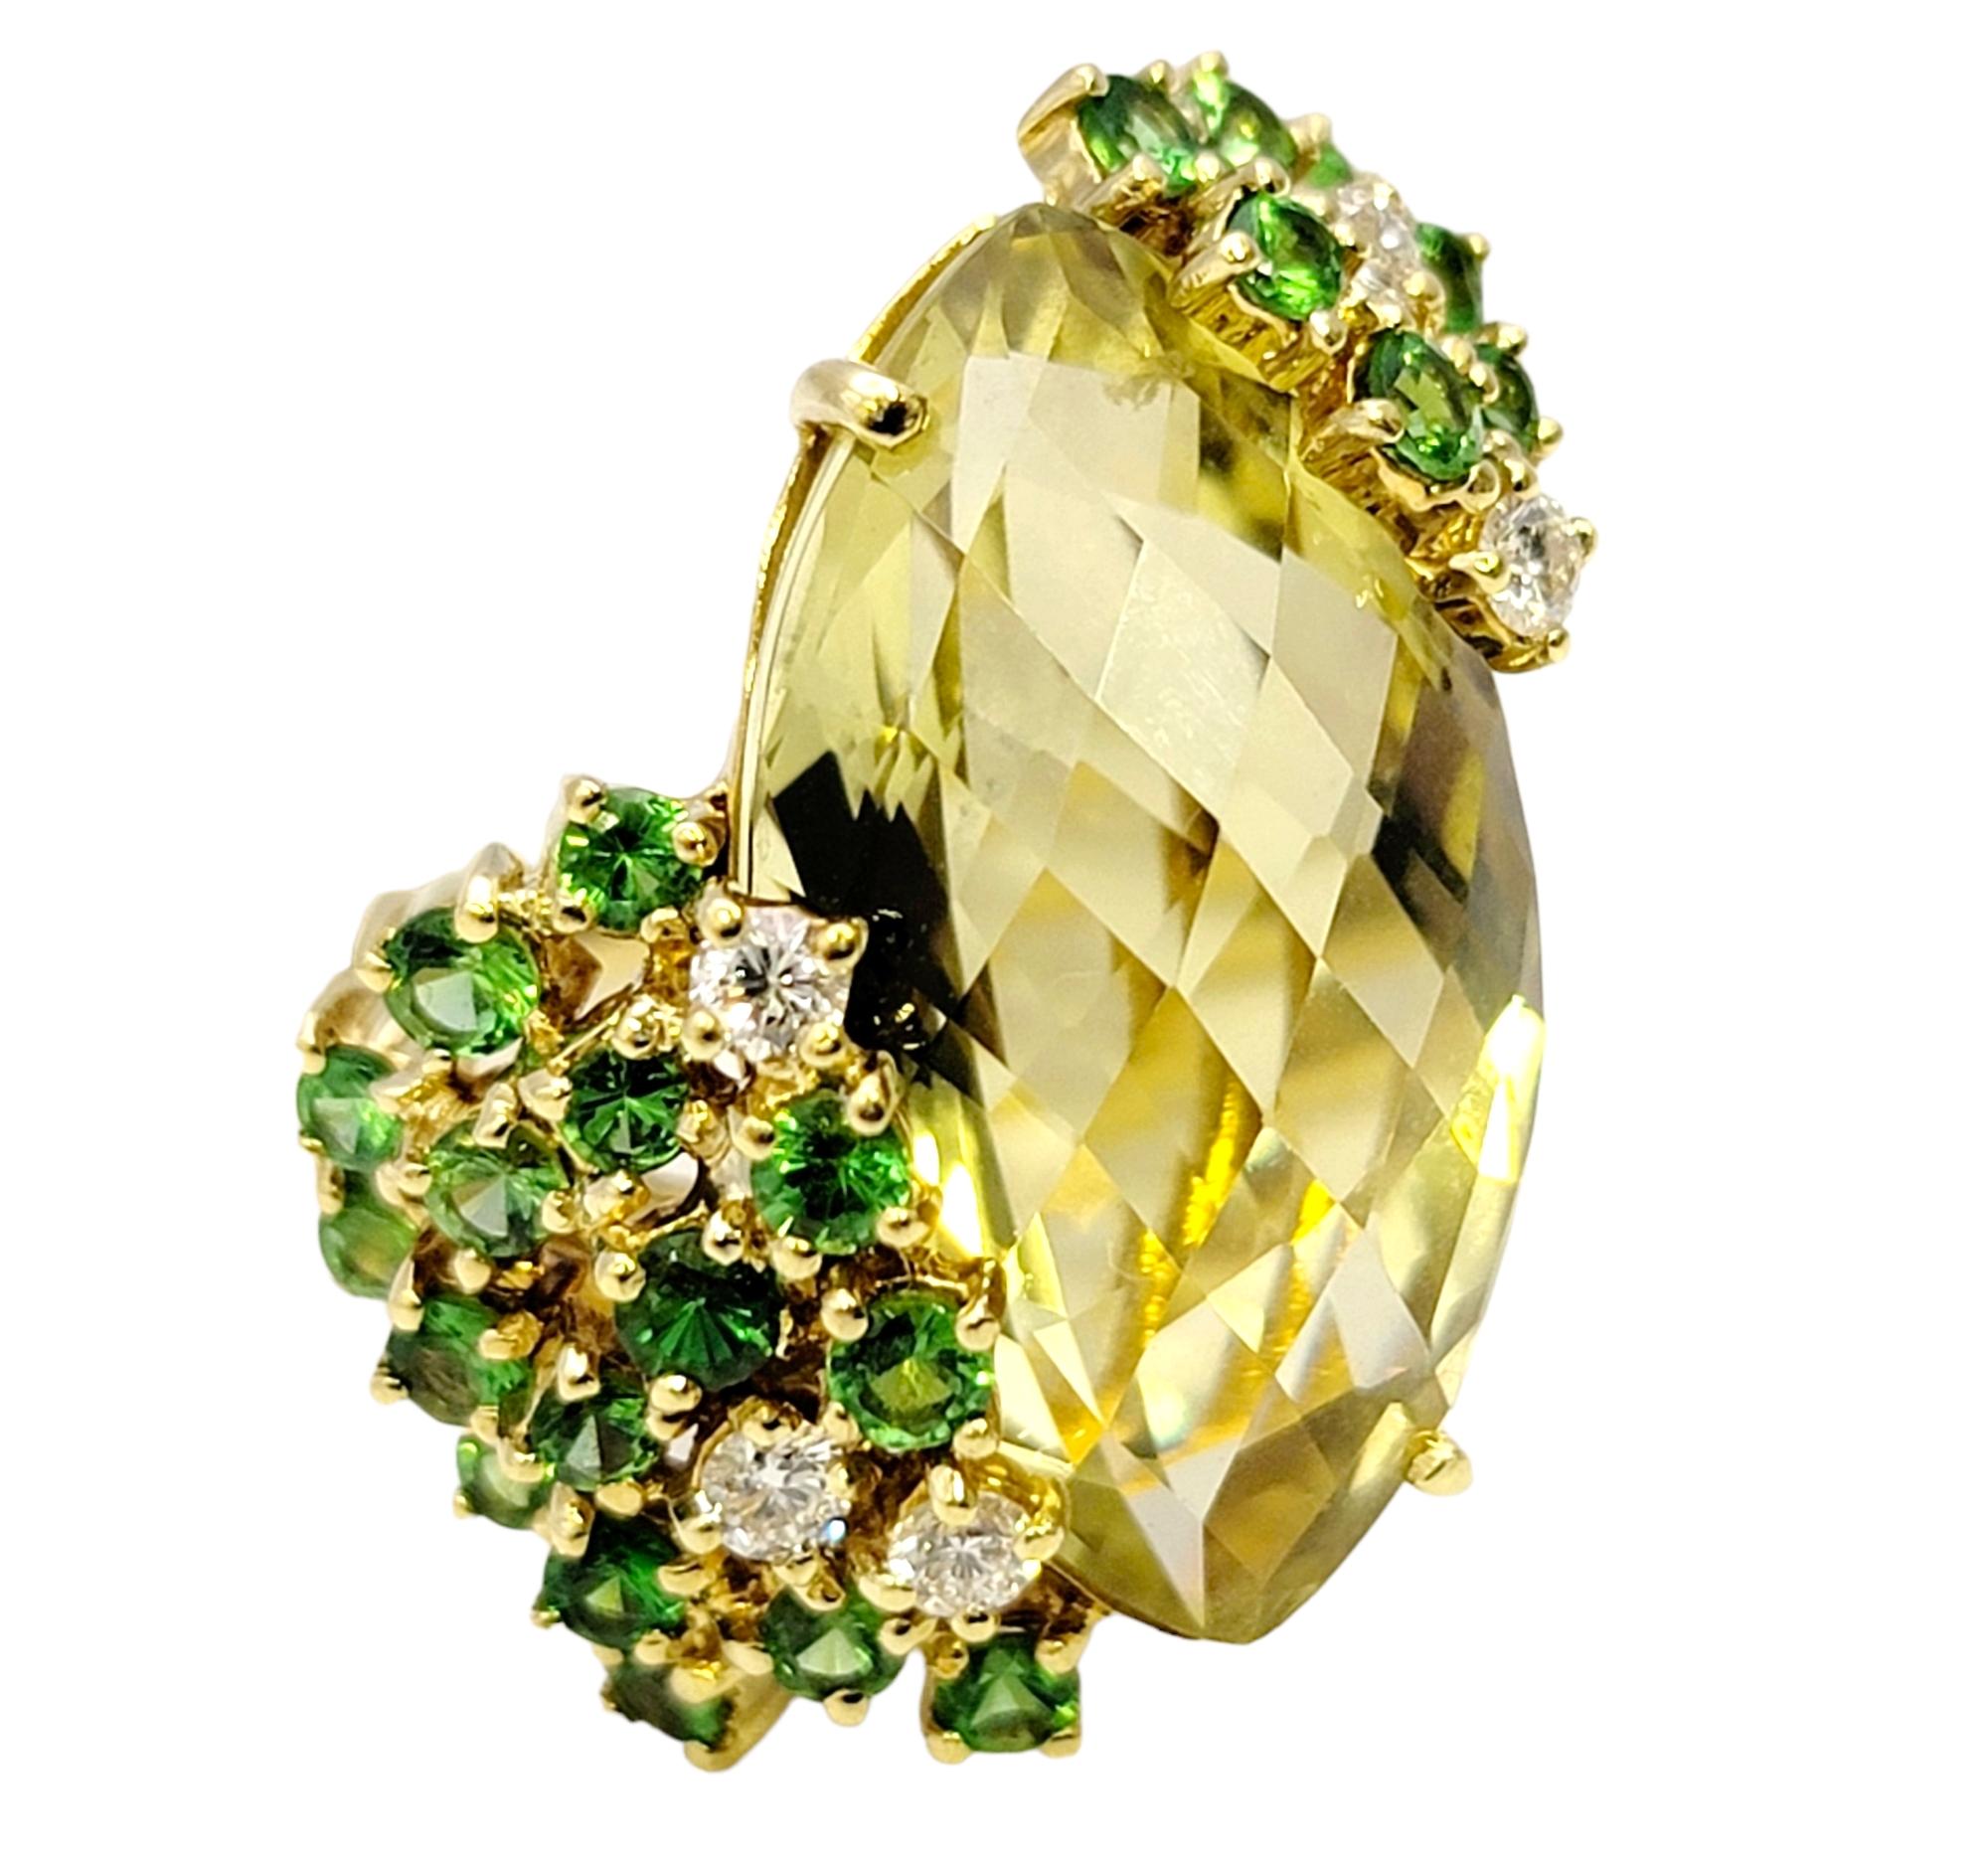 Ring size: 5.75

Introducing a captivating statement piece that is as unique as it is beautiful. This 18 karat yellow gold marquis cut lemon quartz cocktail ring fills the finger with bold color and sophistication. Whether you wear it to a glamorous